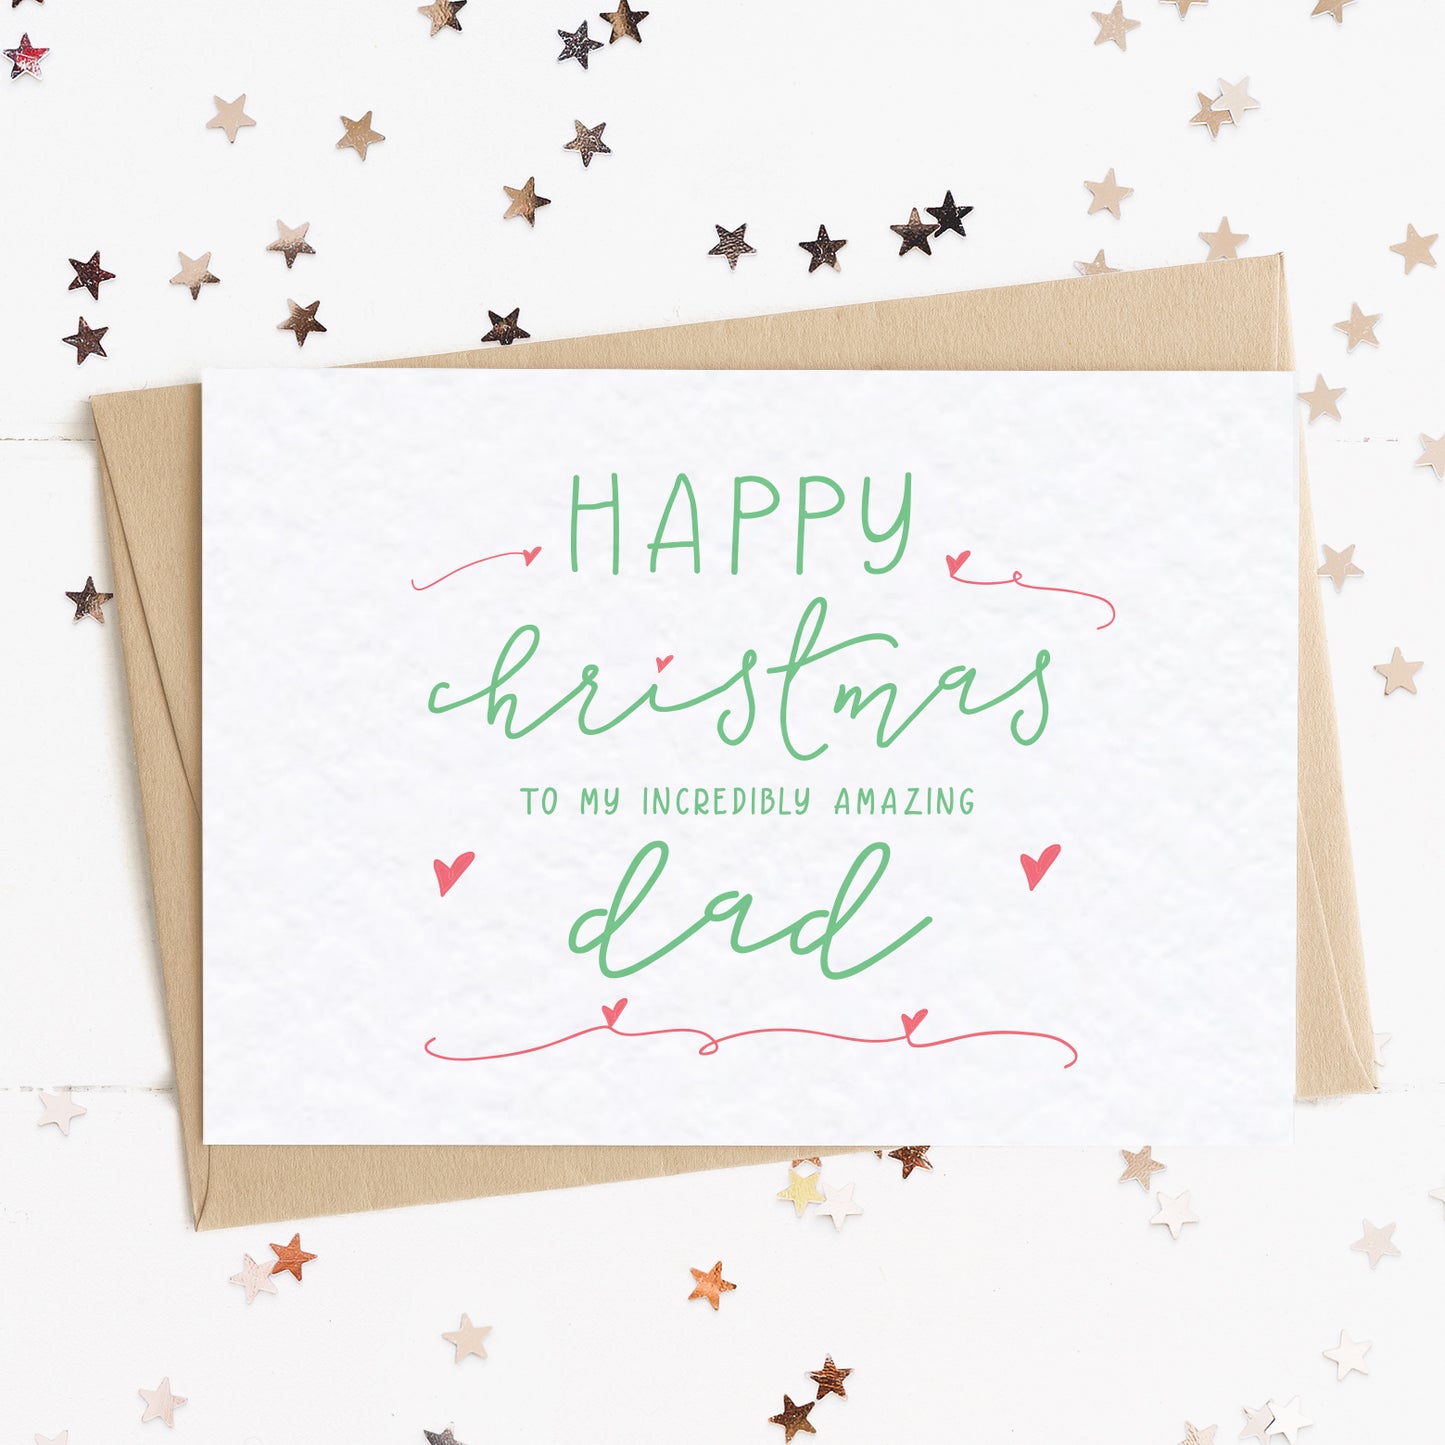 "Merry Christmas To My Incredibly Amazing Dad" Fun Festive Parents Card